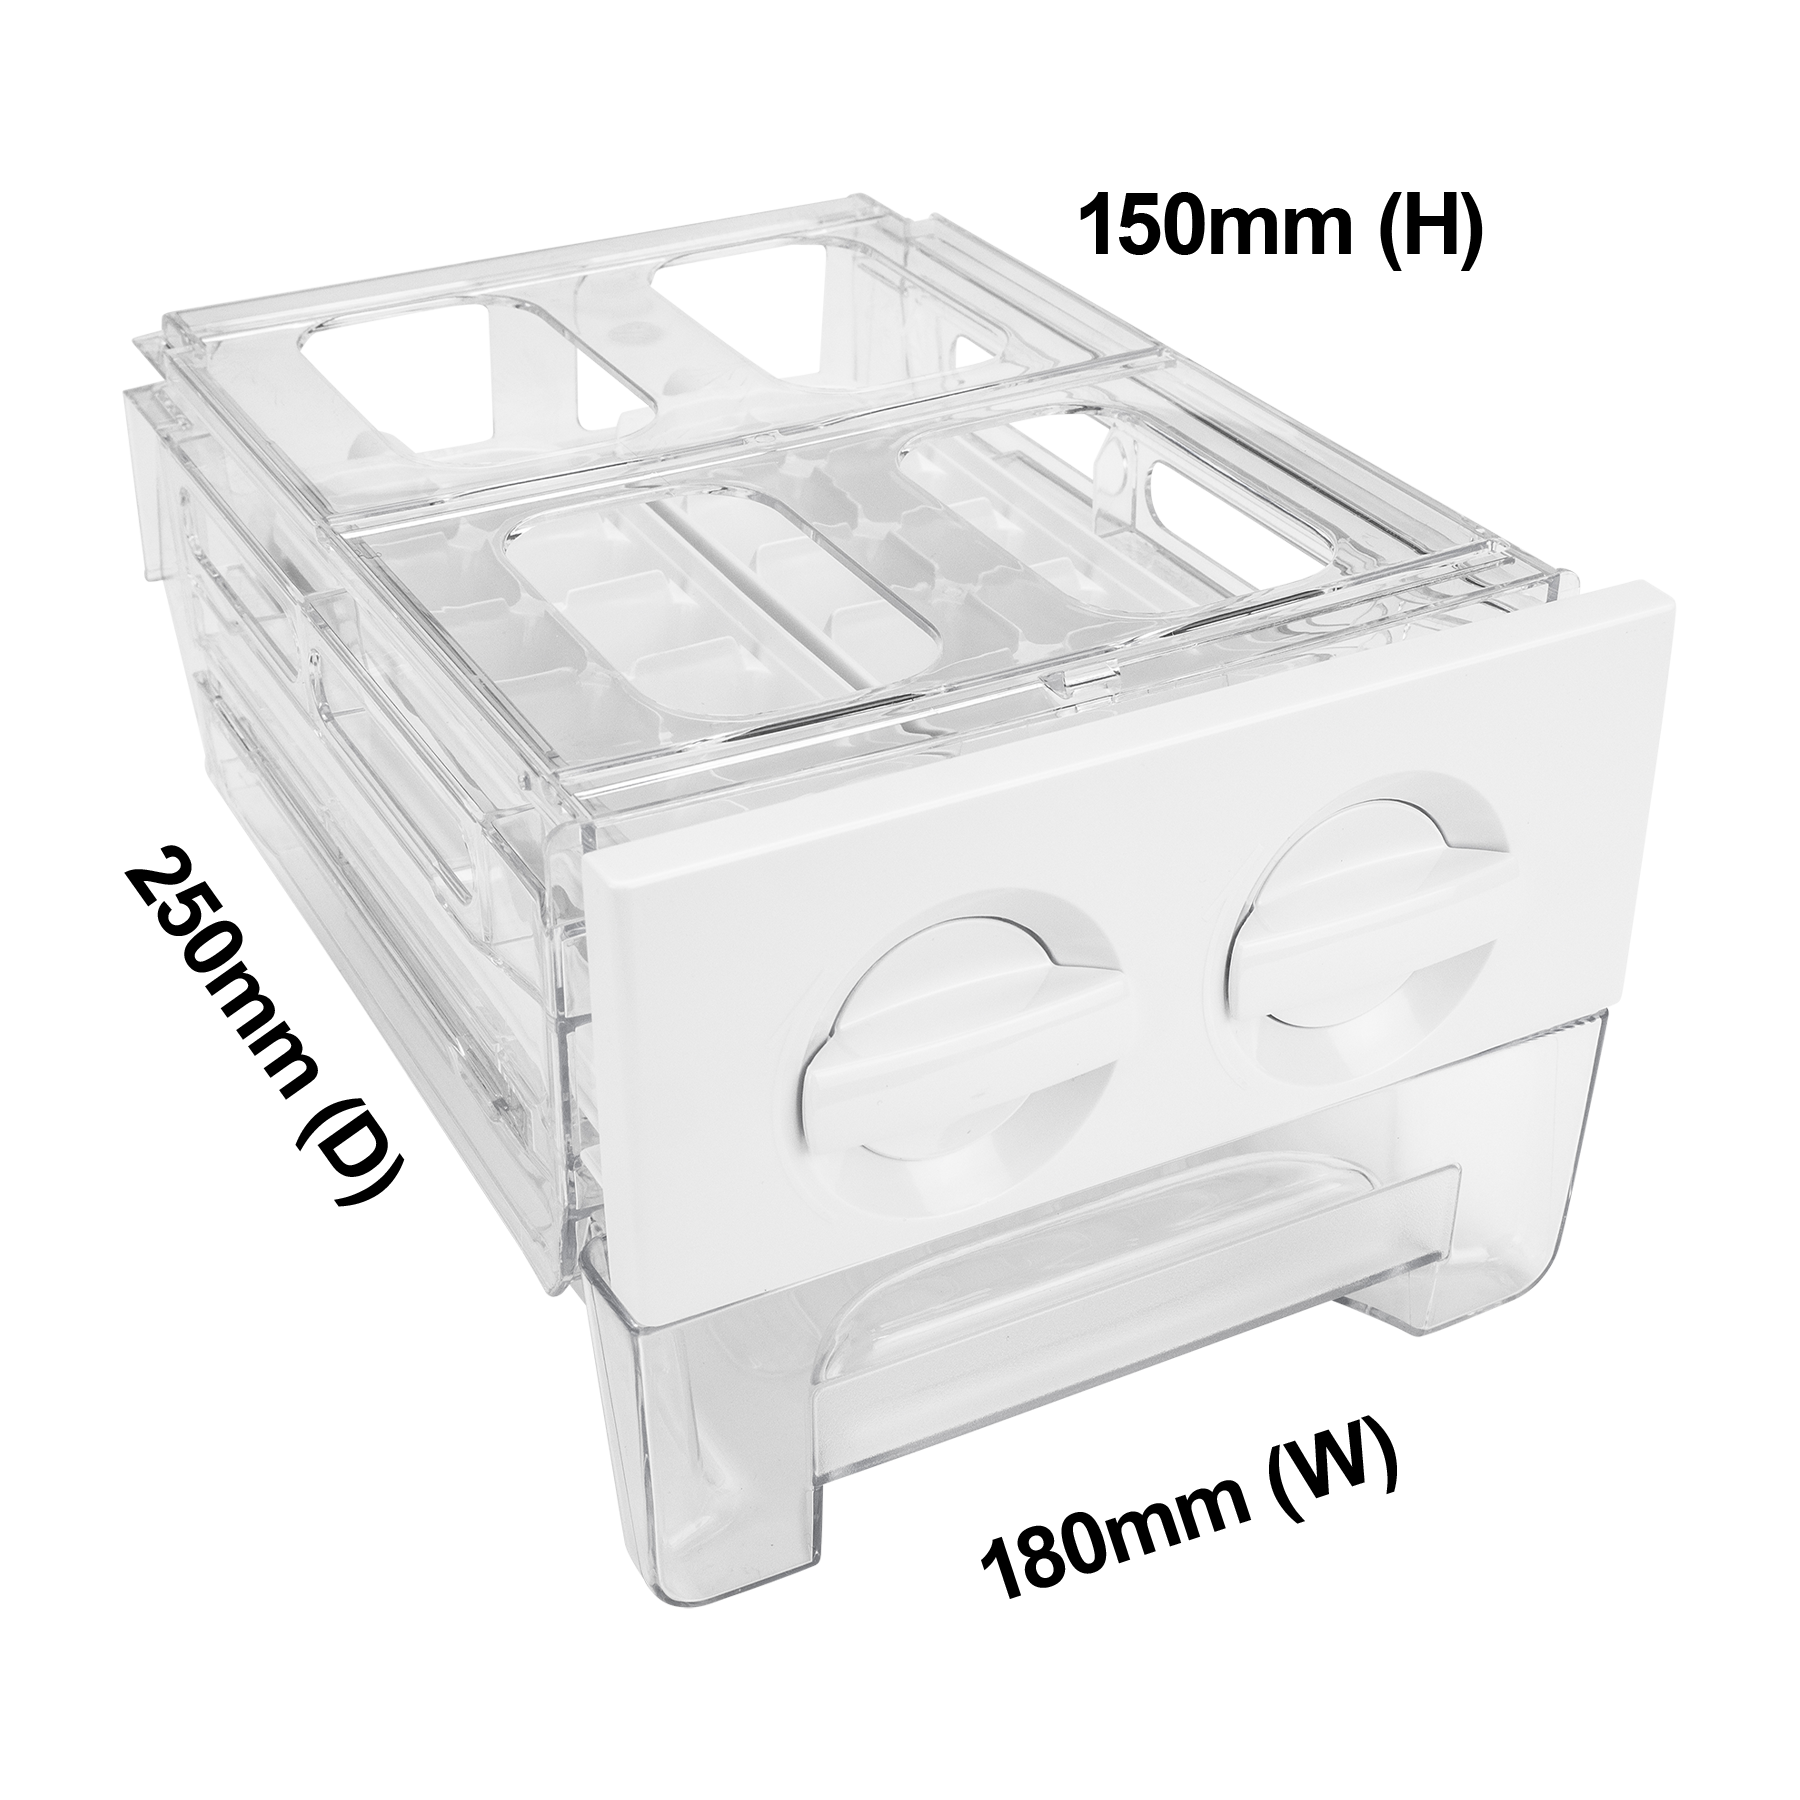 /globalassets/images/accessory-images/sku140012667014-tray-ice-kit-2-twist--serves-plus-bin-front-left.png